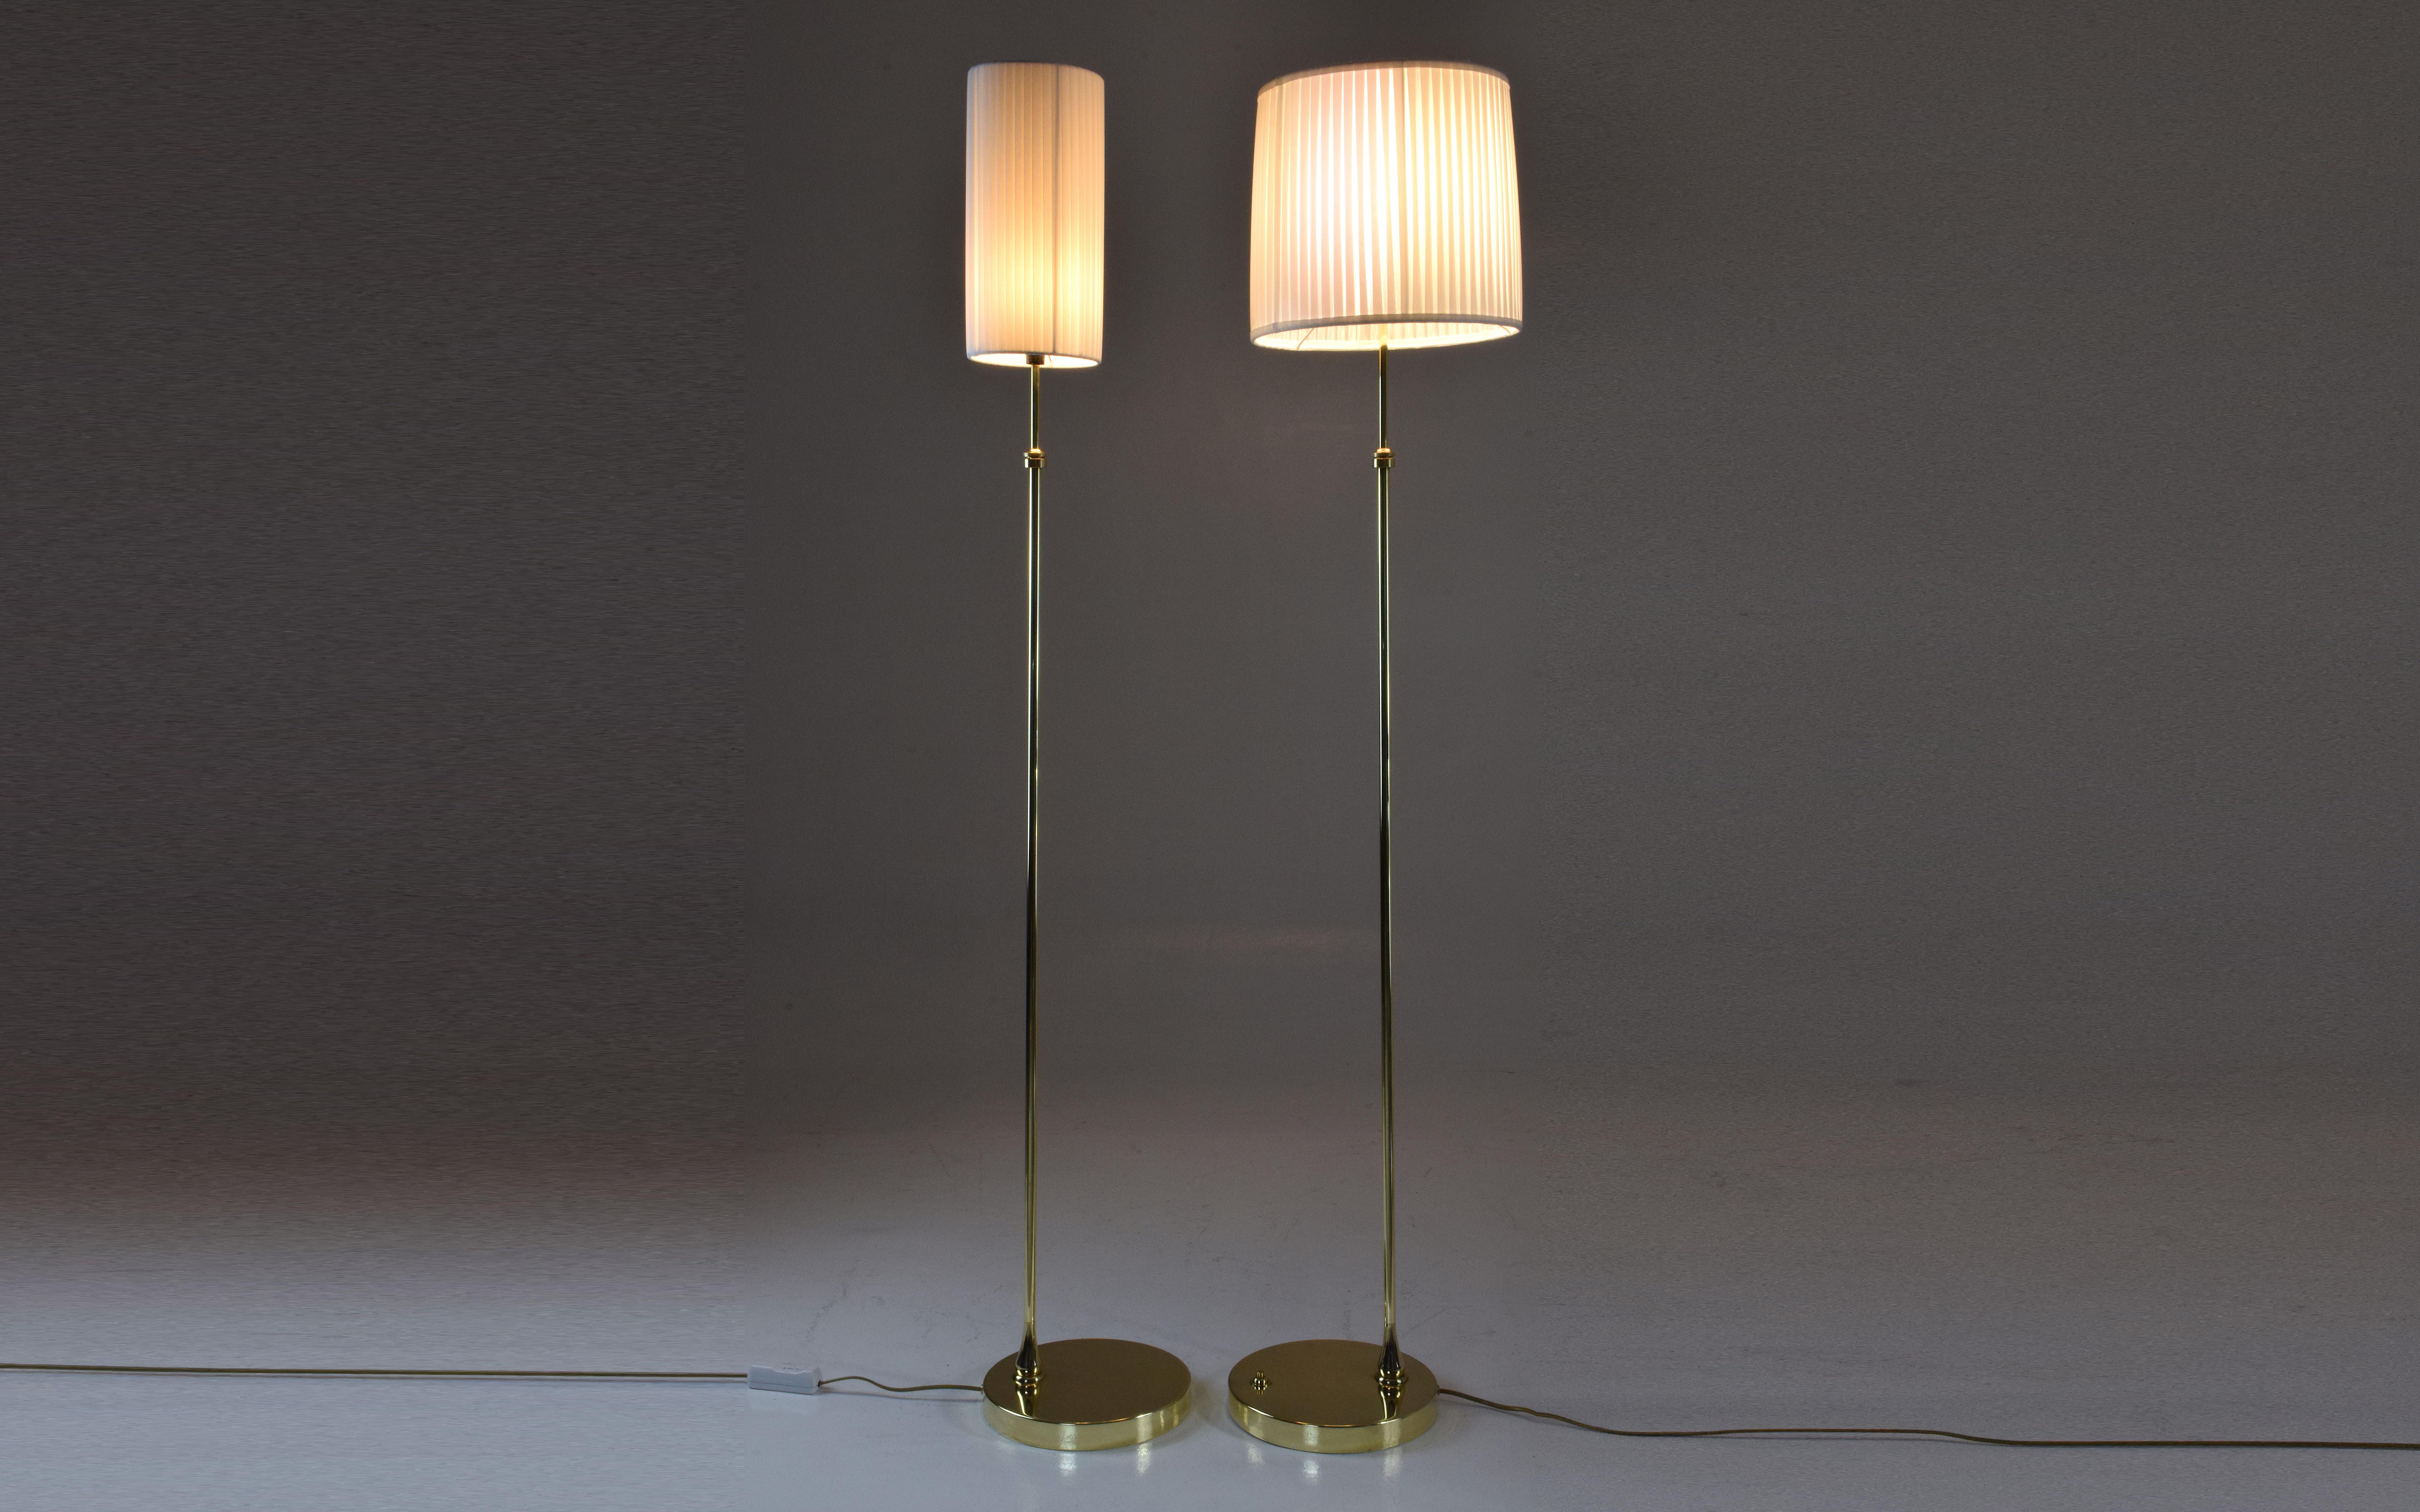 Equilibrium-I Contemporary Handcrafted Adjustable Brass Floor Lamp 2